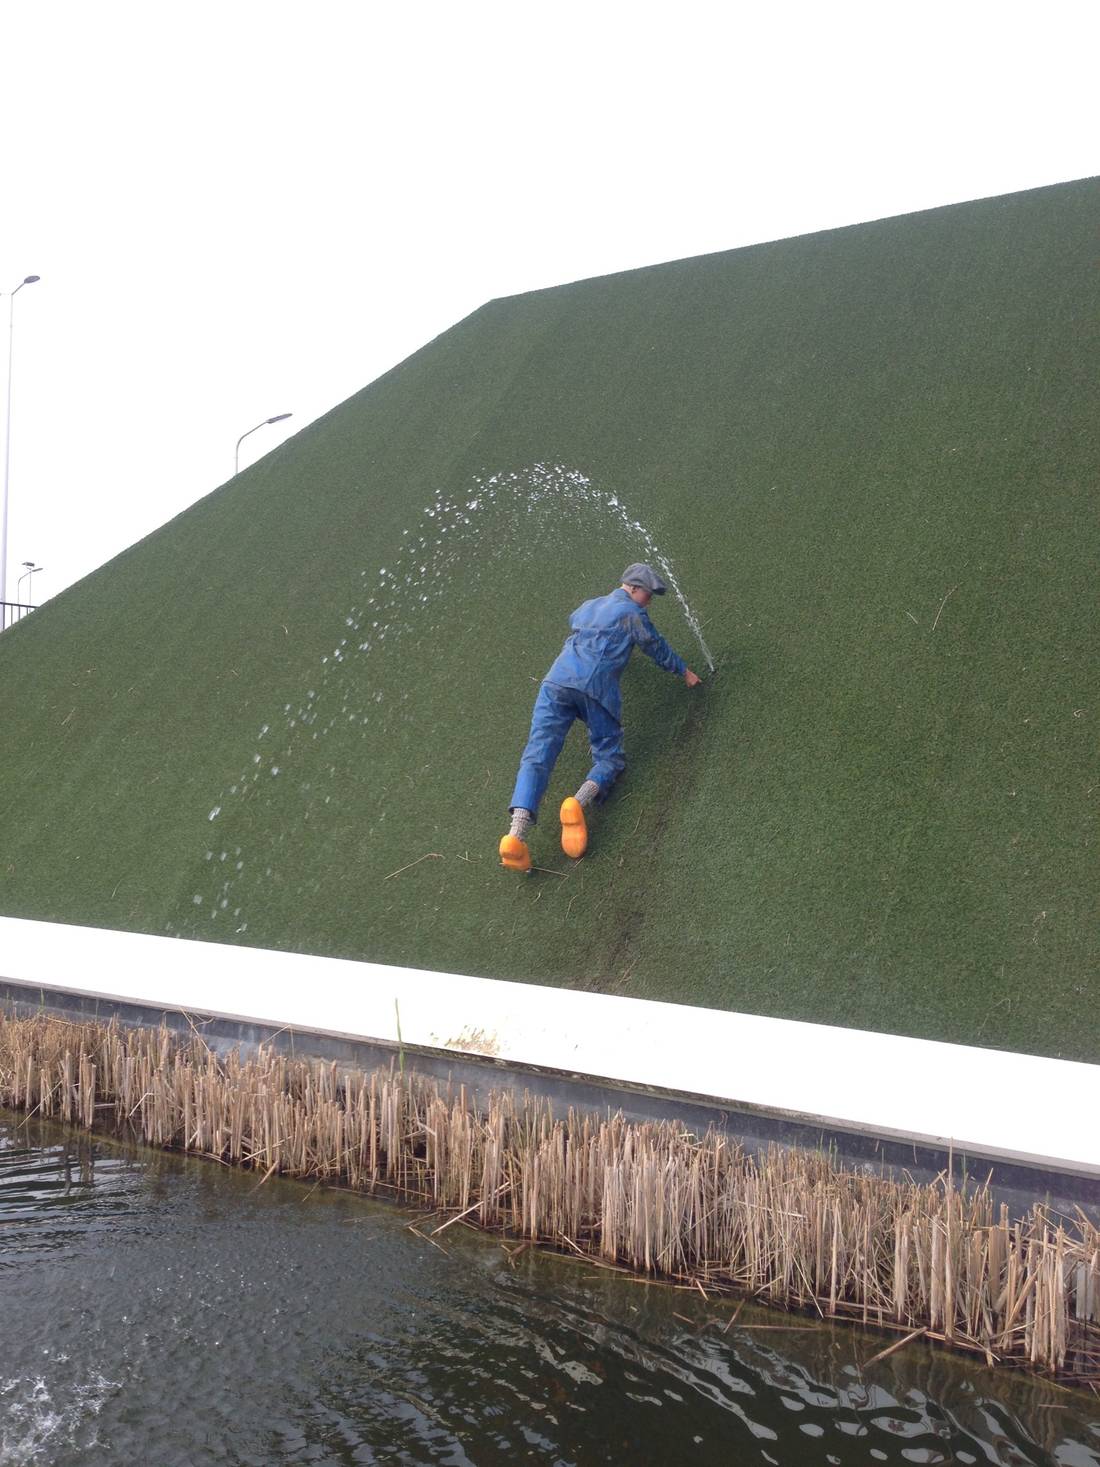 The typical dutch story about someone stopping the flood